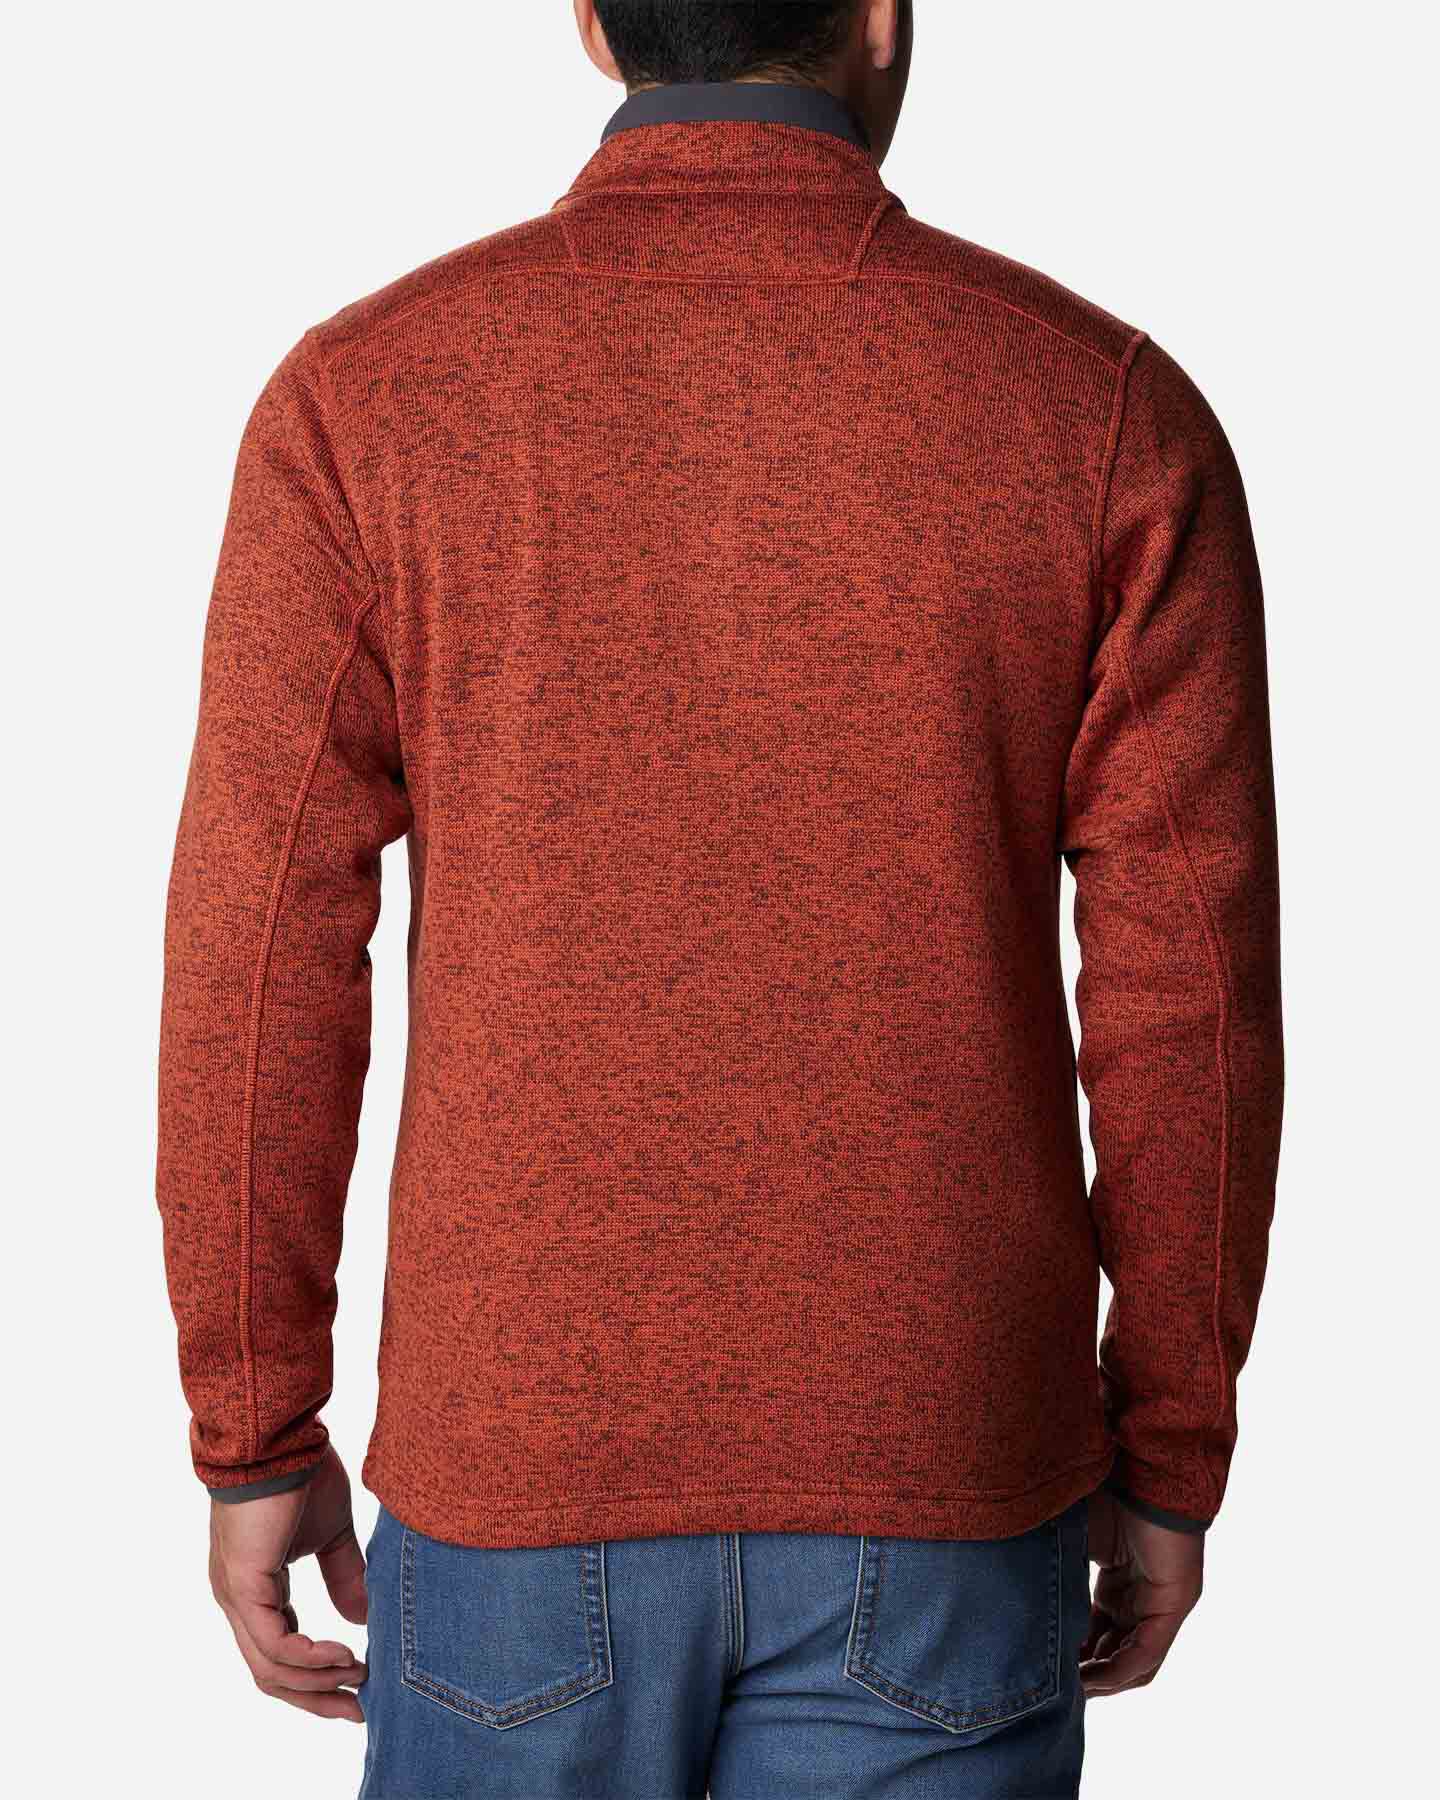  Pile COLUMBIA SWEATER WEATHER M S5575729|849|S scatto 3